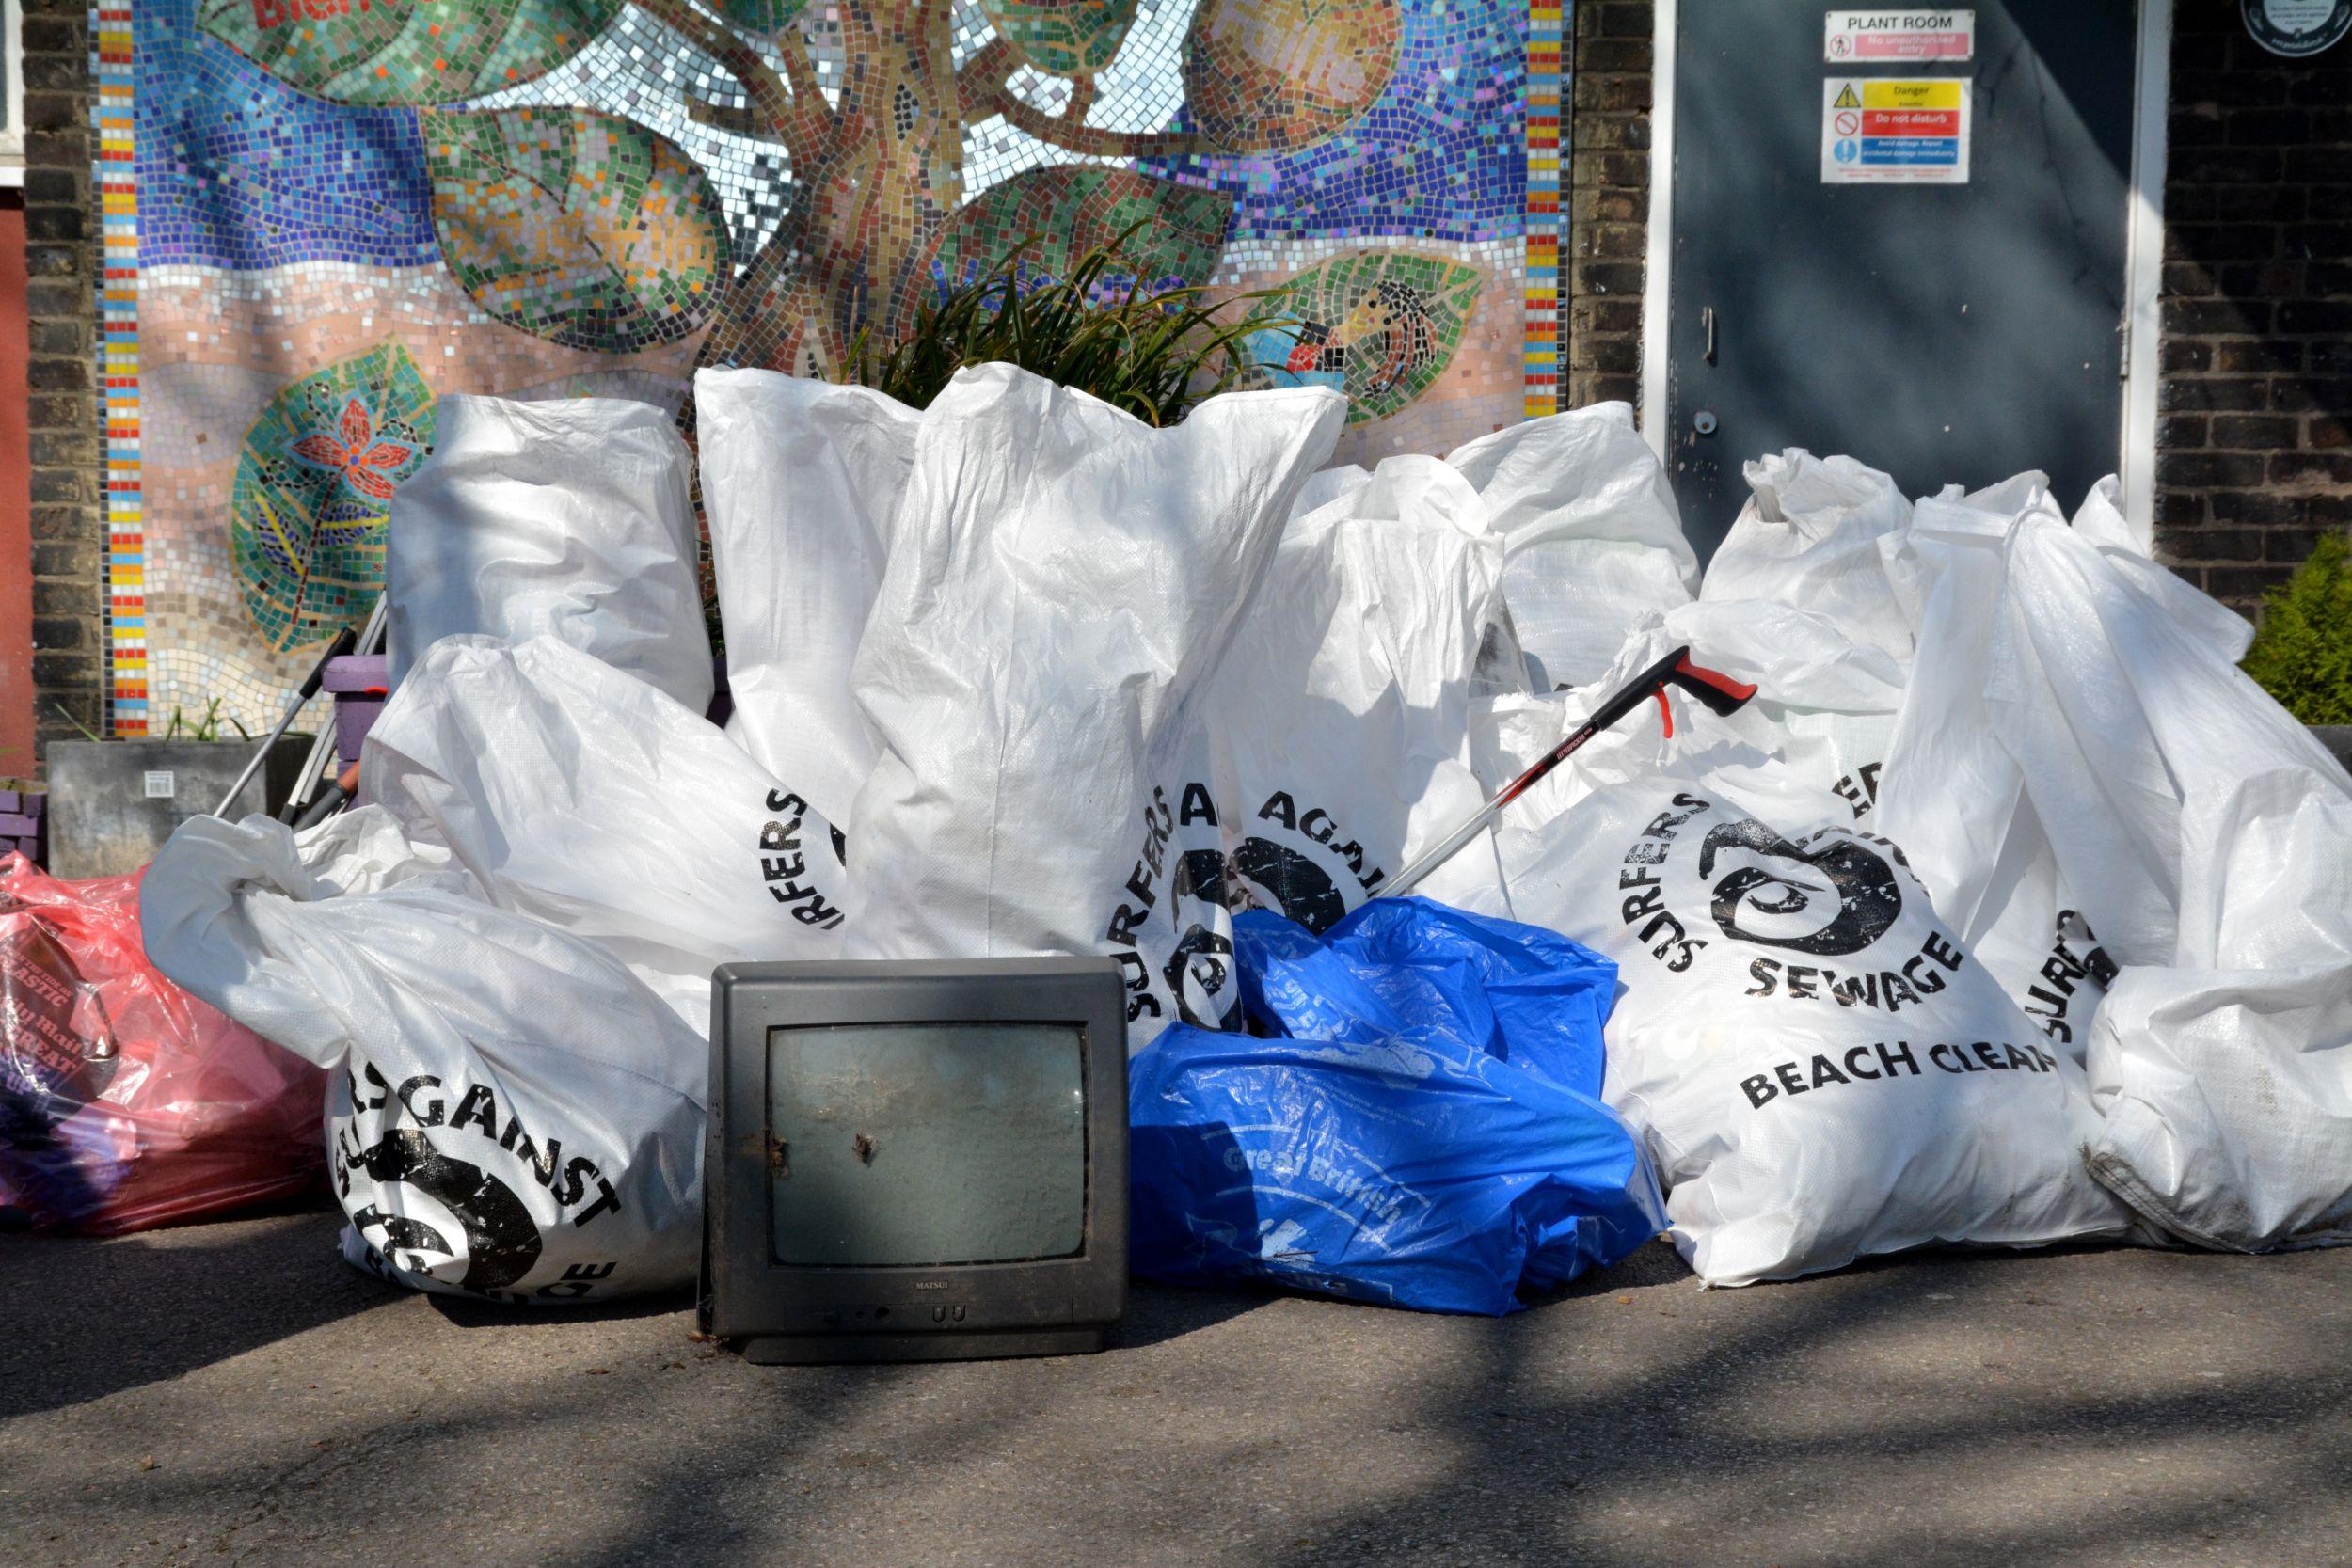 A collection of refuse sacks filled with litter